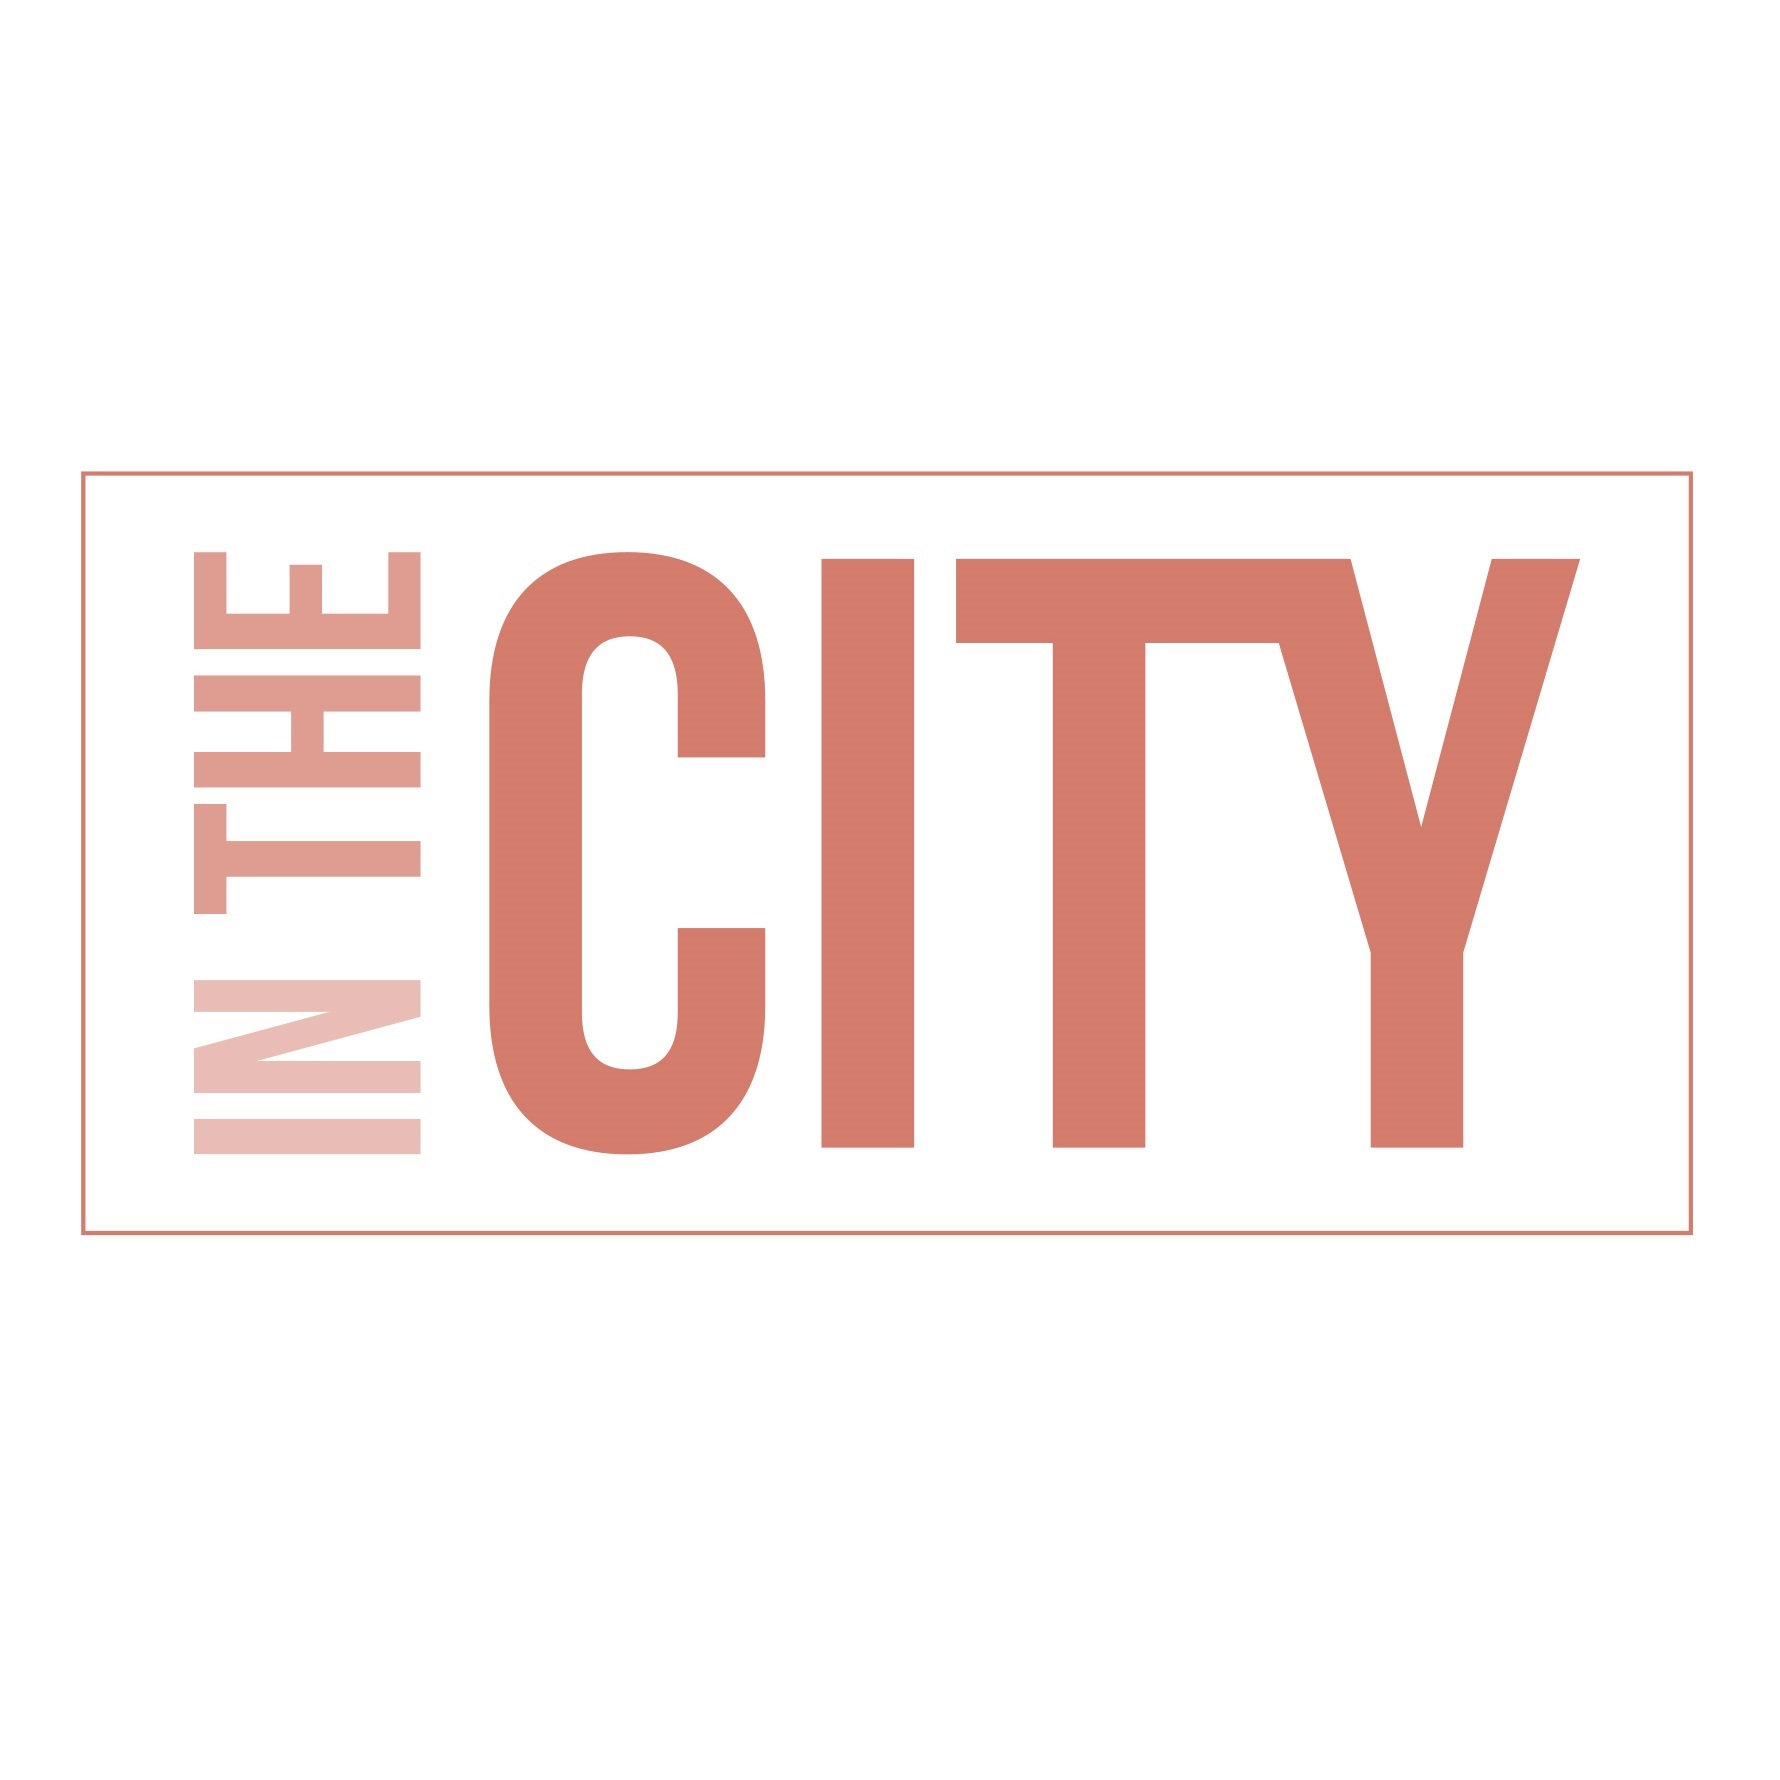 In The City App – Download now!